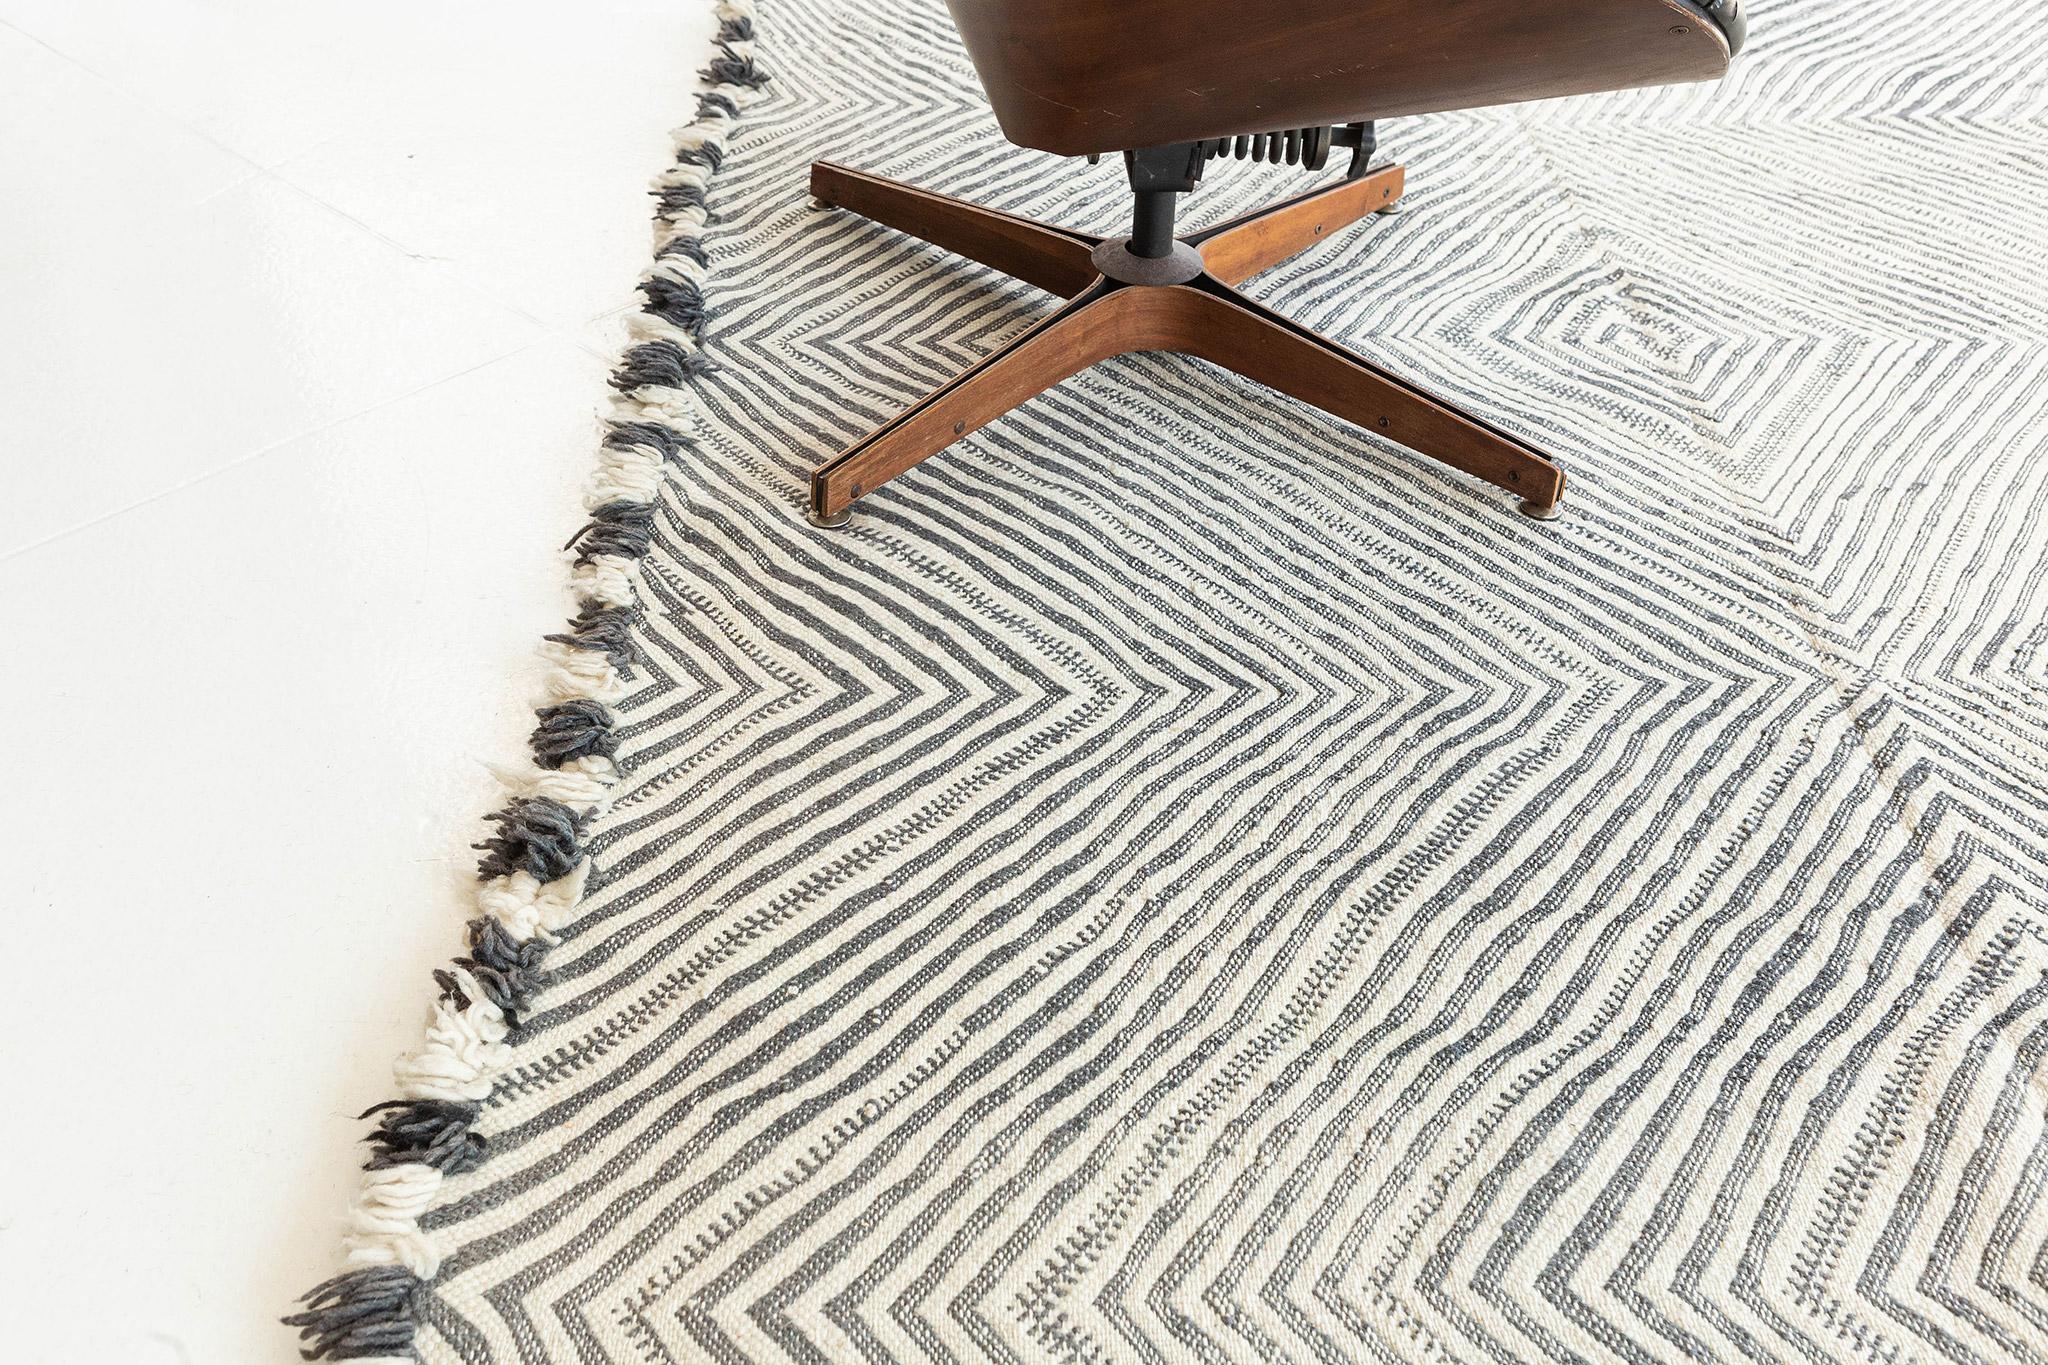 Featuring a glorious illusion effect, this Moroccan Kilim rug adds texture and subtle graphic appeal forming a warm, relaxed space. The abrashed field is covered in an all-over diamond effect reminiscent of a kaleidoscope across the tantalizing and